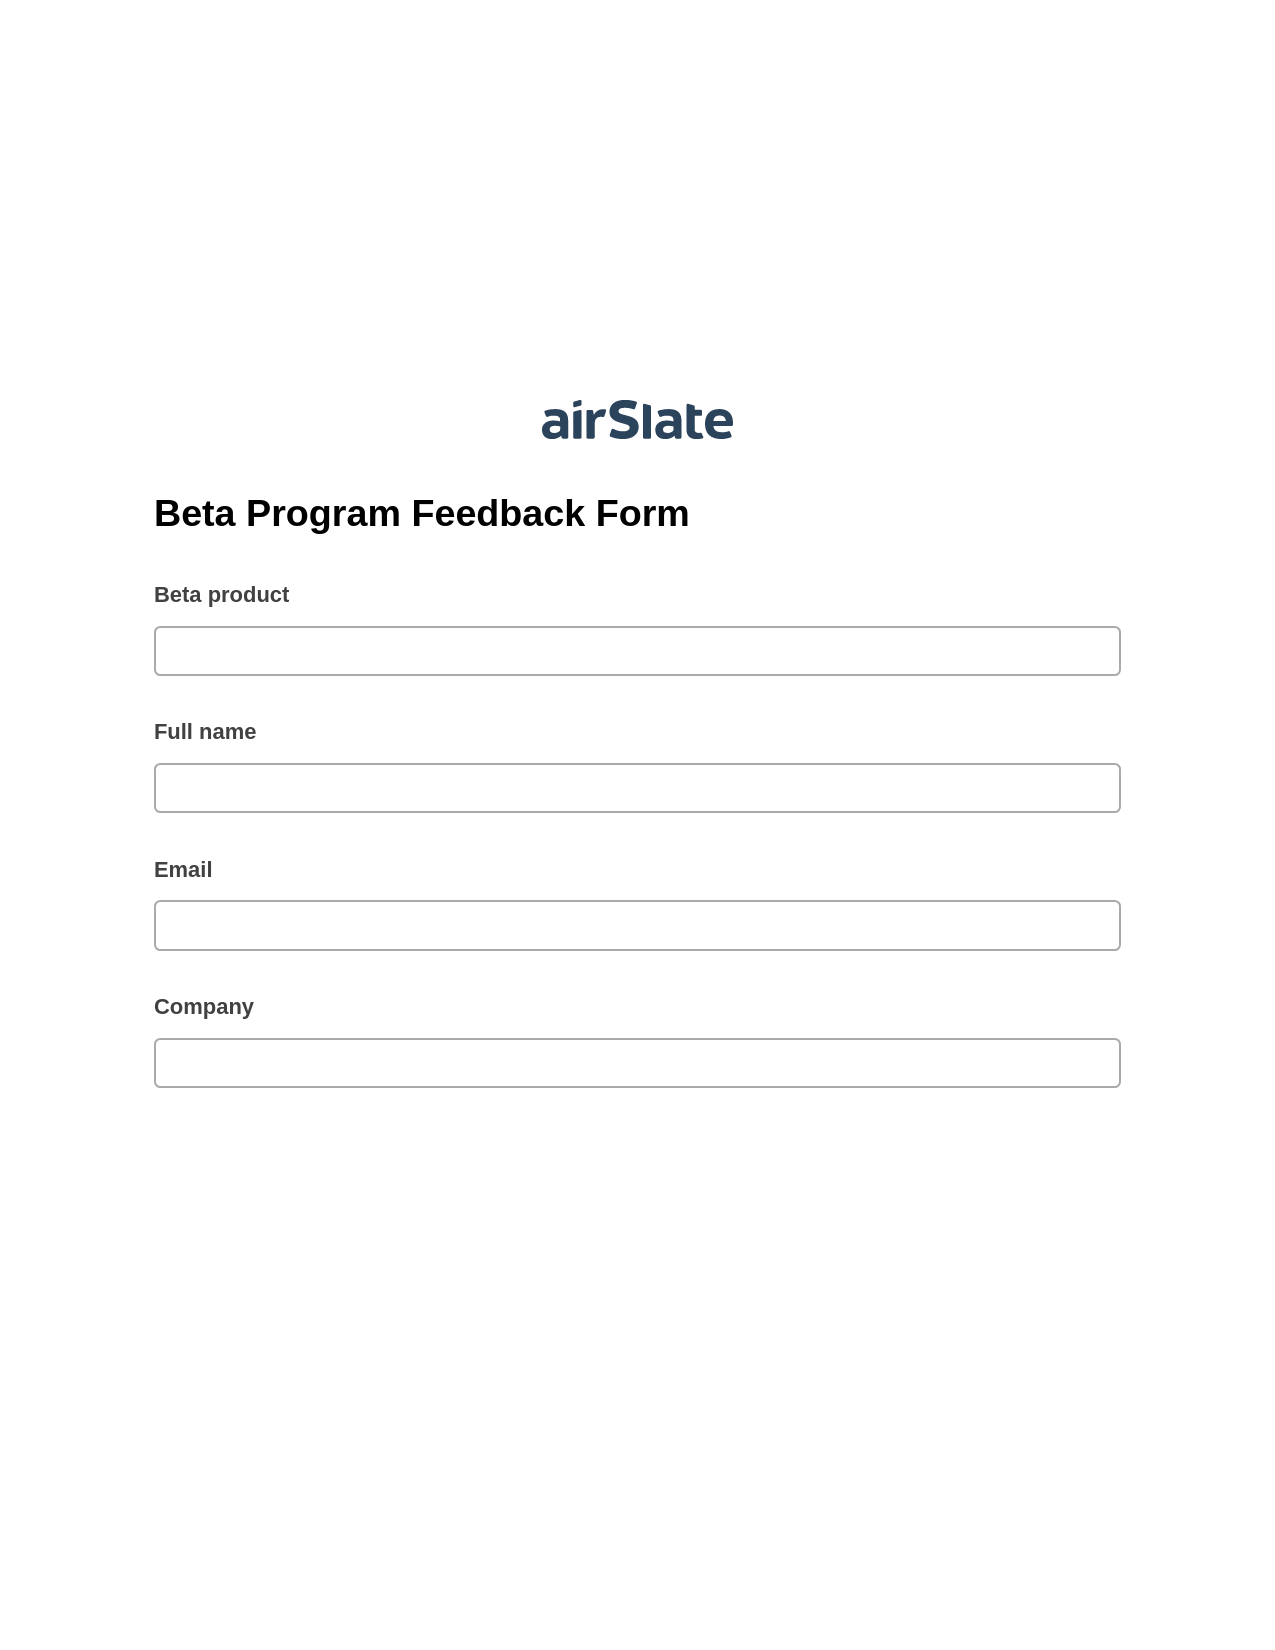 Multirole Beta Program Feedback Form Pre-fill from Google Sheets Bot, Remove Tags From Slate Bot, Export to Smartsheet